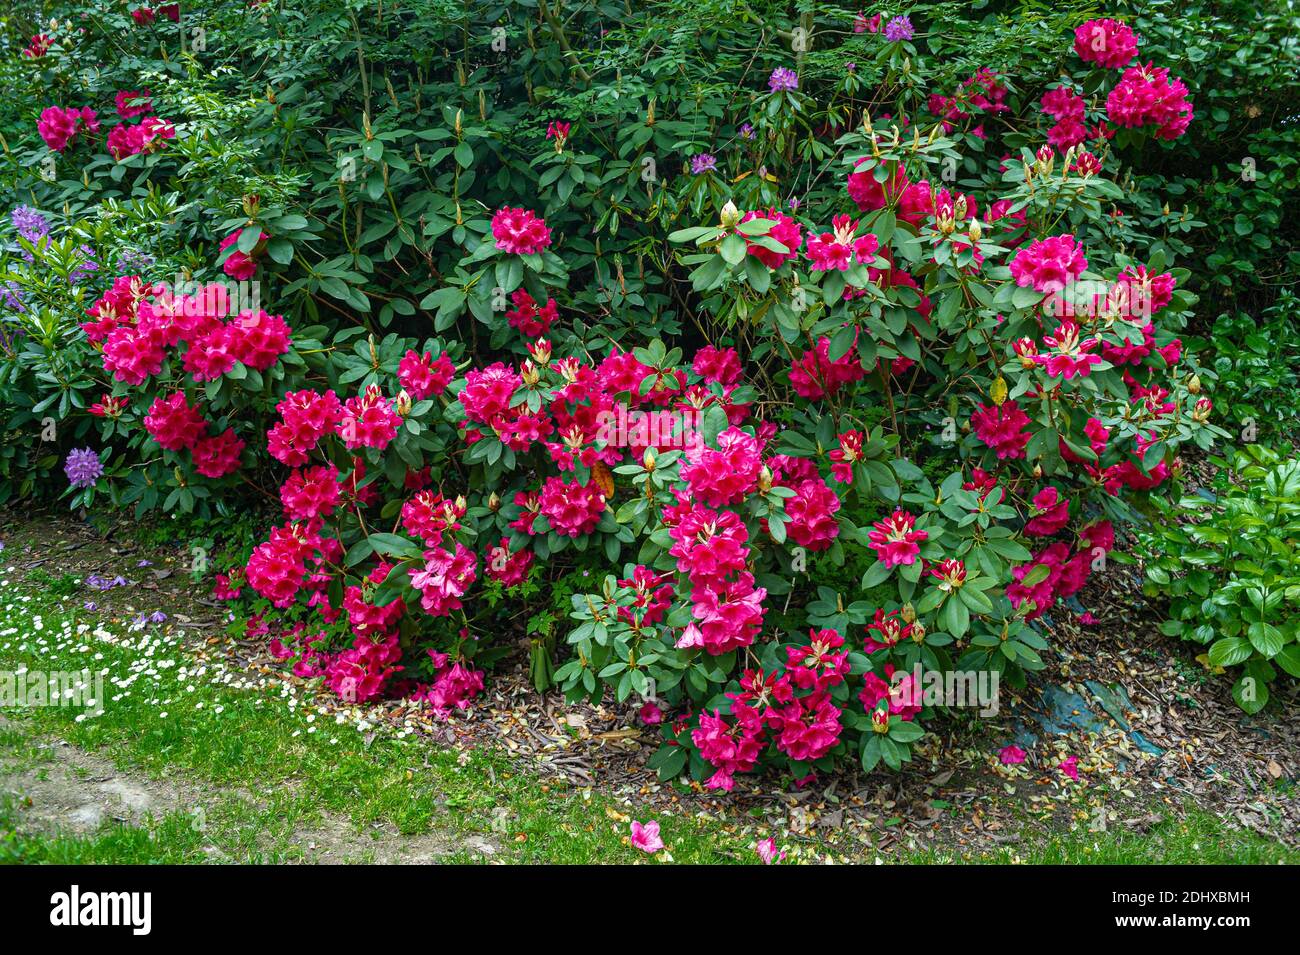 Opulent clump of rodhodendrons lining a path in a park. The bright red flowers catch the eye in the middle of the foliage. Stock Photo